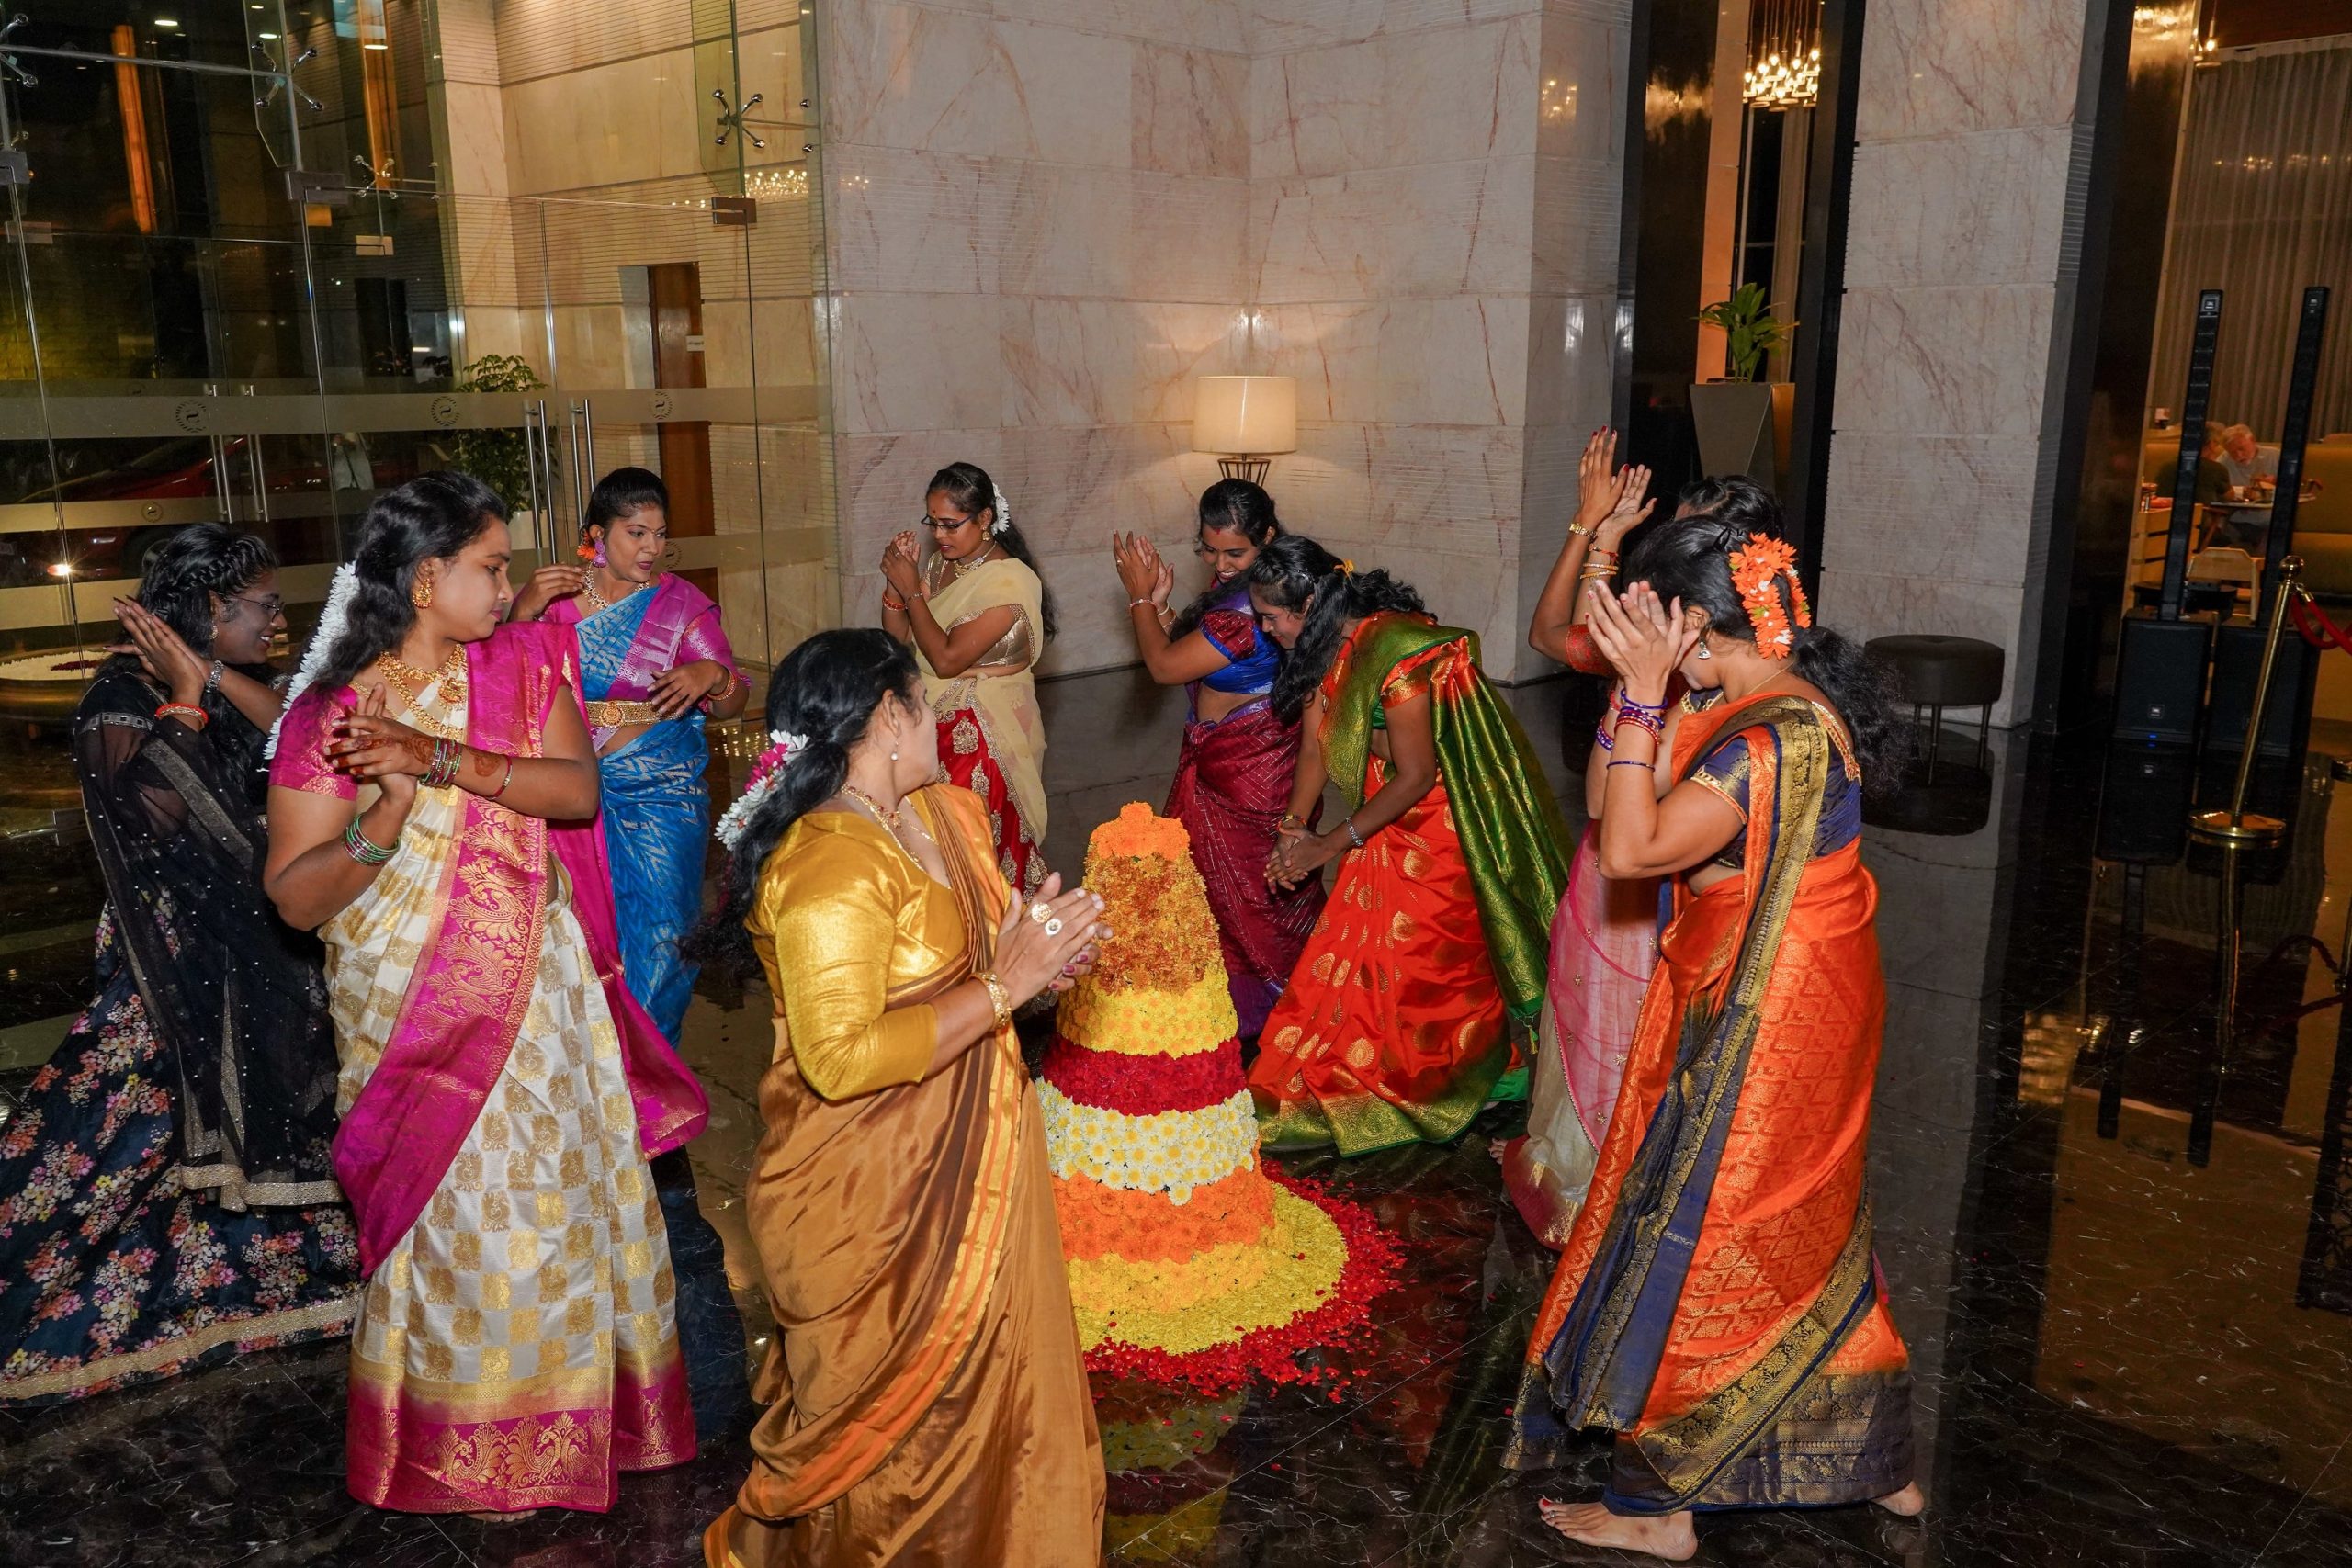 Sheraton Hyderabad Hotel Buzzes With Excitement As The Week-Long Taste Of Telangana Festival Kicks Off